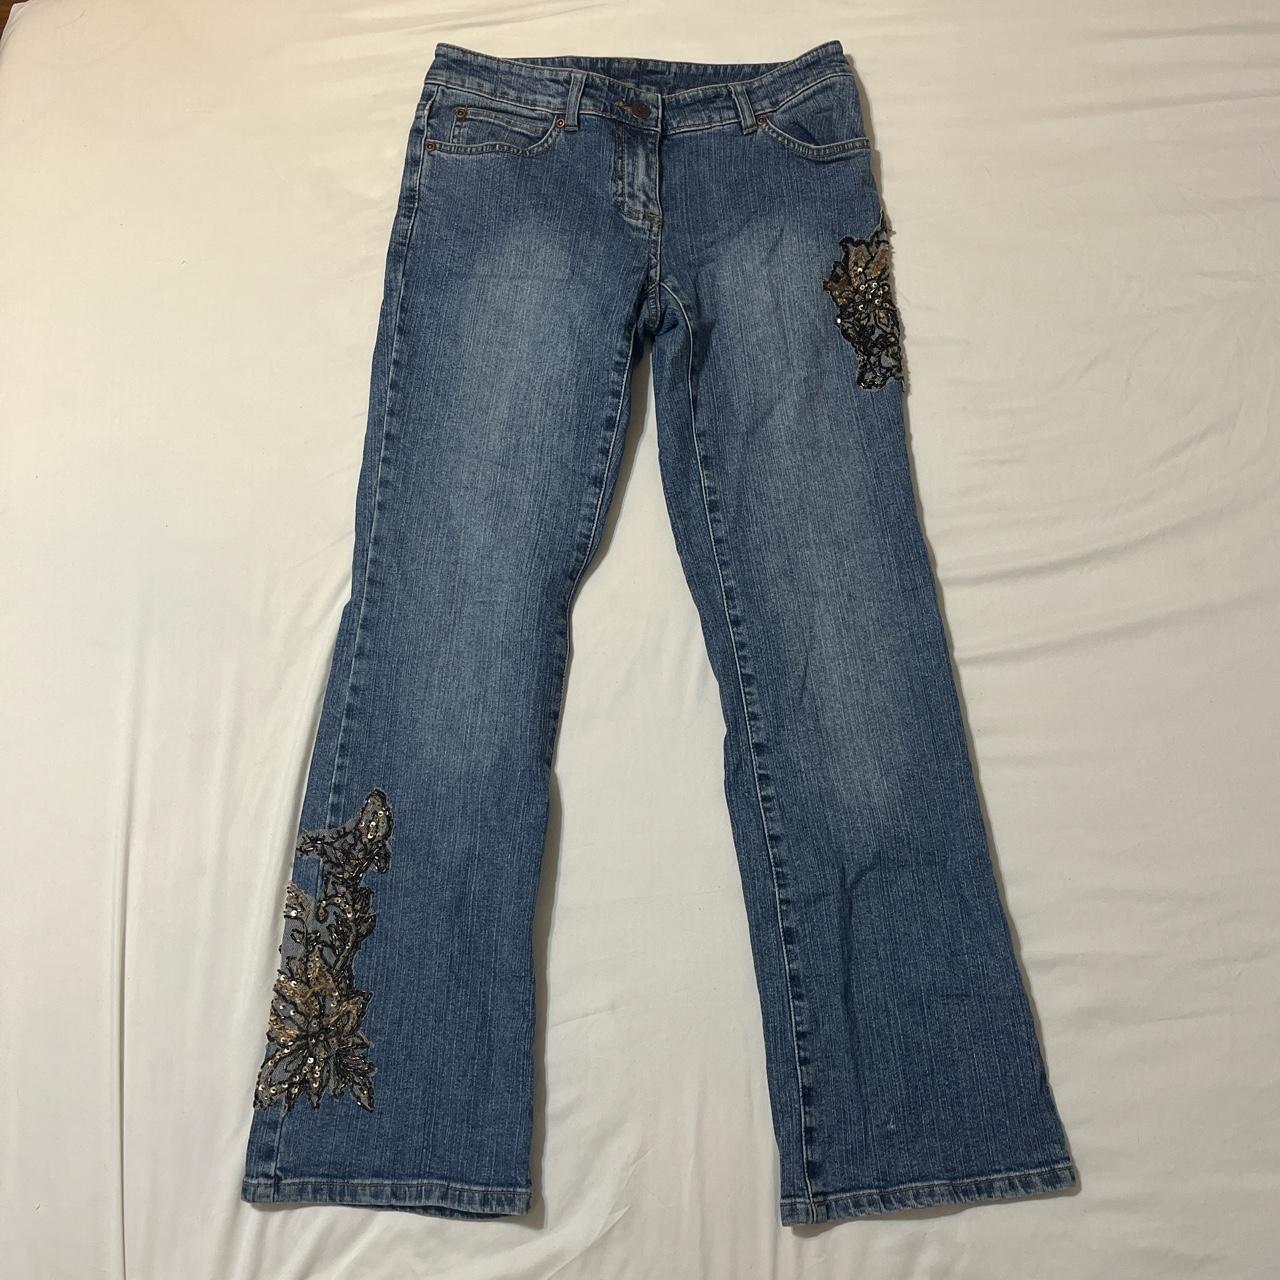 Miss Me Women's Blue and Gold Jeans | Depop